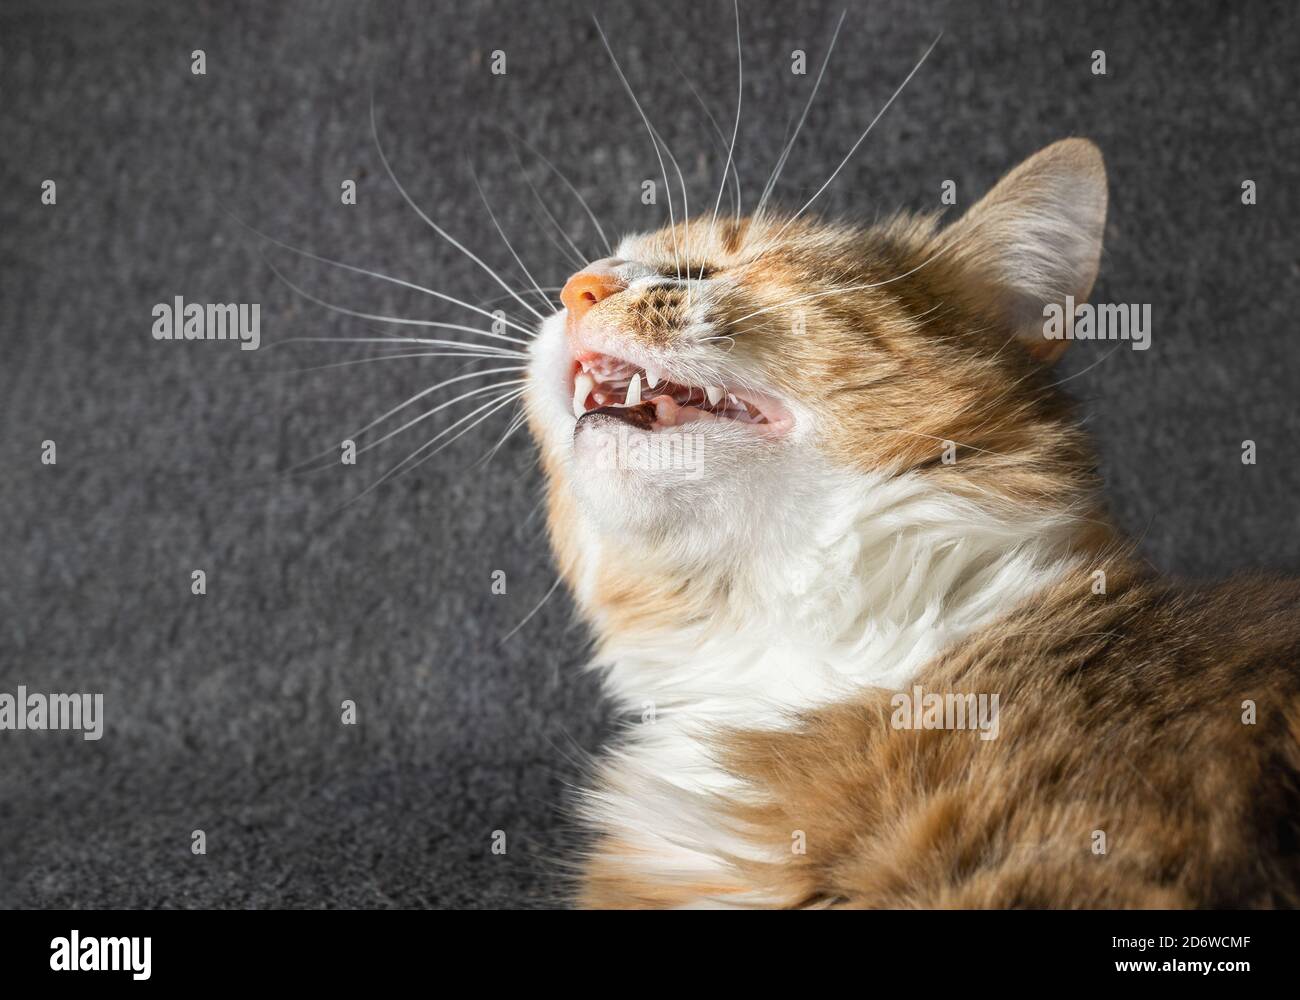 Sneezing cat, side portrait. Cat head is tilted upwards with open mouth and visible teeth. Concept for infections in pets or signs of sickness in pets Stock Photo